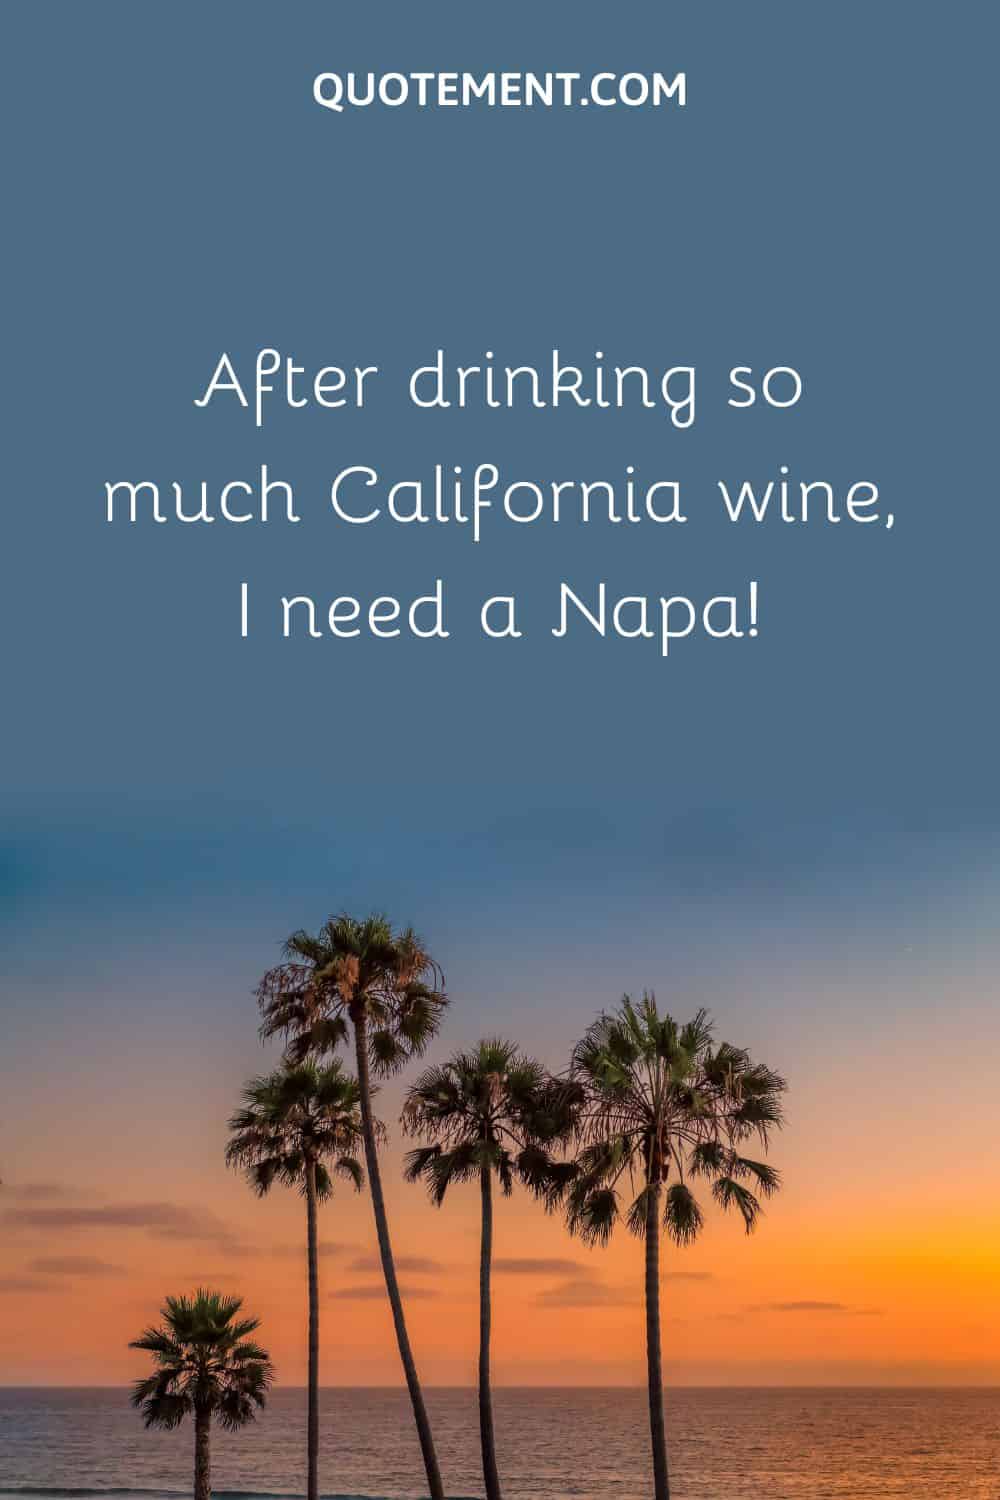 After drinking so much California wine, I need a Napa